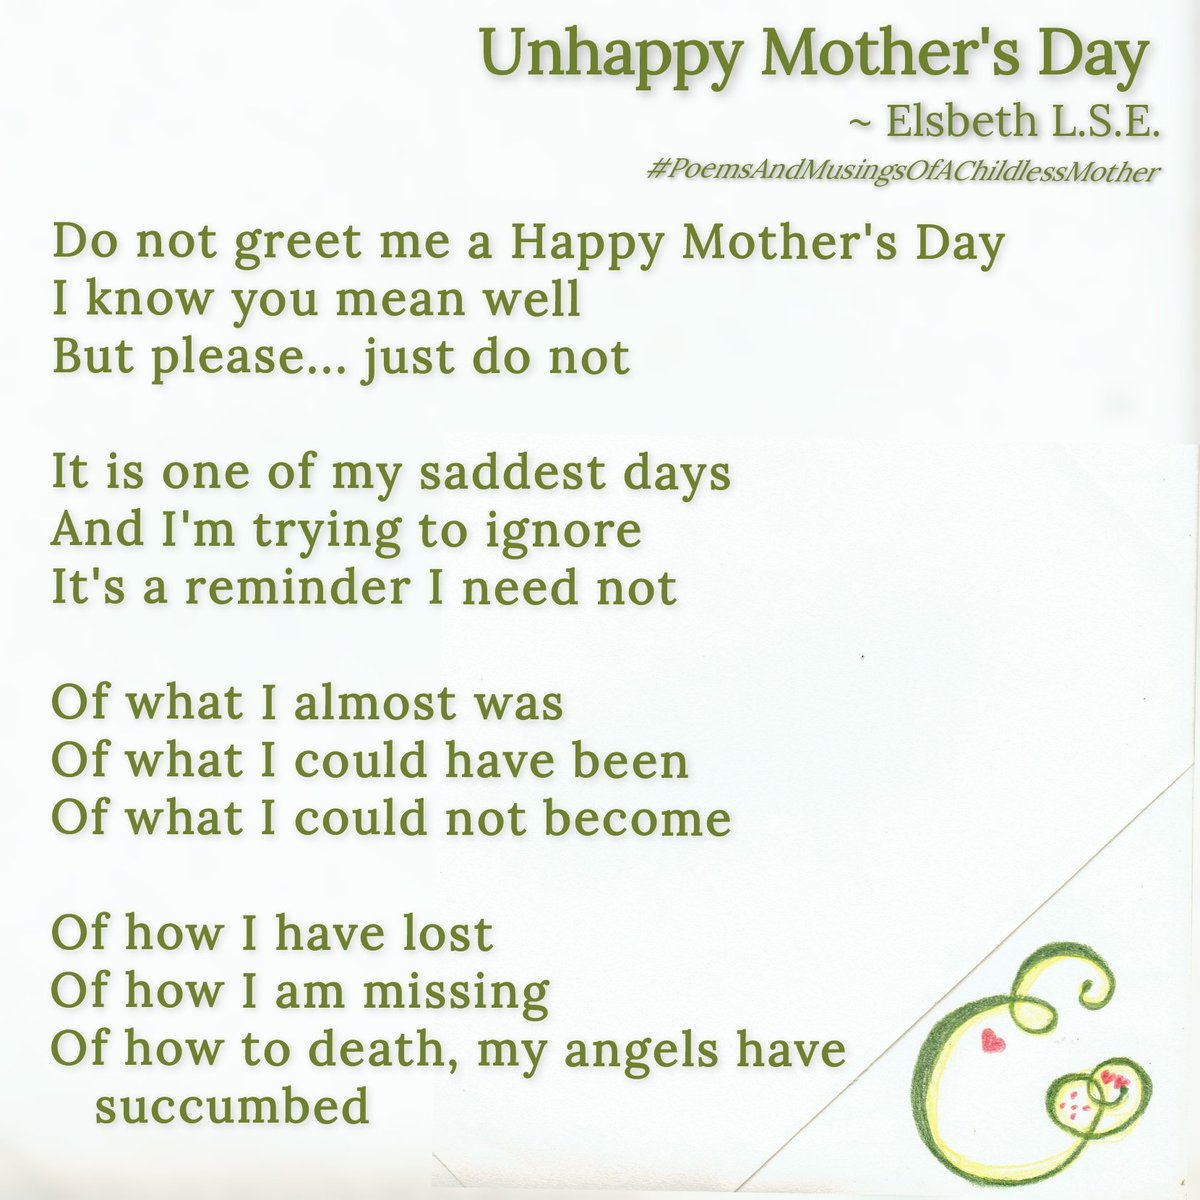 Unhappy Mother's Day - A poem by Elsbeth L.S.E.
#ElsbethLSEpoems #Poetry #PoemsOfPain #PoemsOfLoss #PoemsOfAChildlessMother #ElsbethLSEmusings #MusingsOfAChildlessMother
#Miscarriage #PregnancyLoss #HealingProcess #GrievingProcess #RespectGrief #LifeAfterLoss
#GriefHasNoTimeLimit